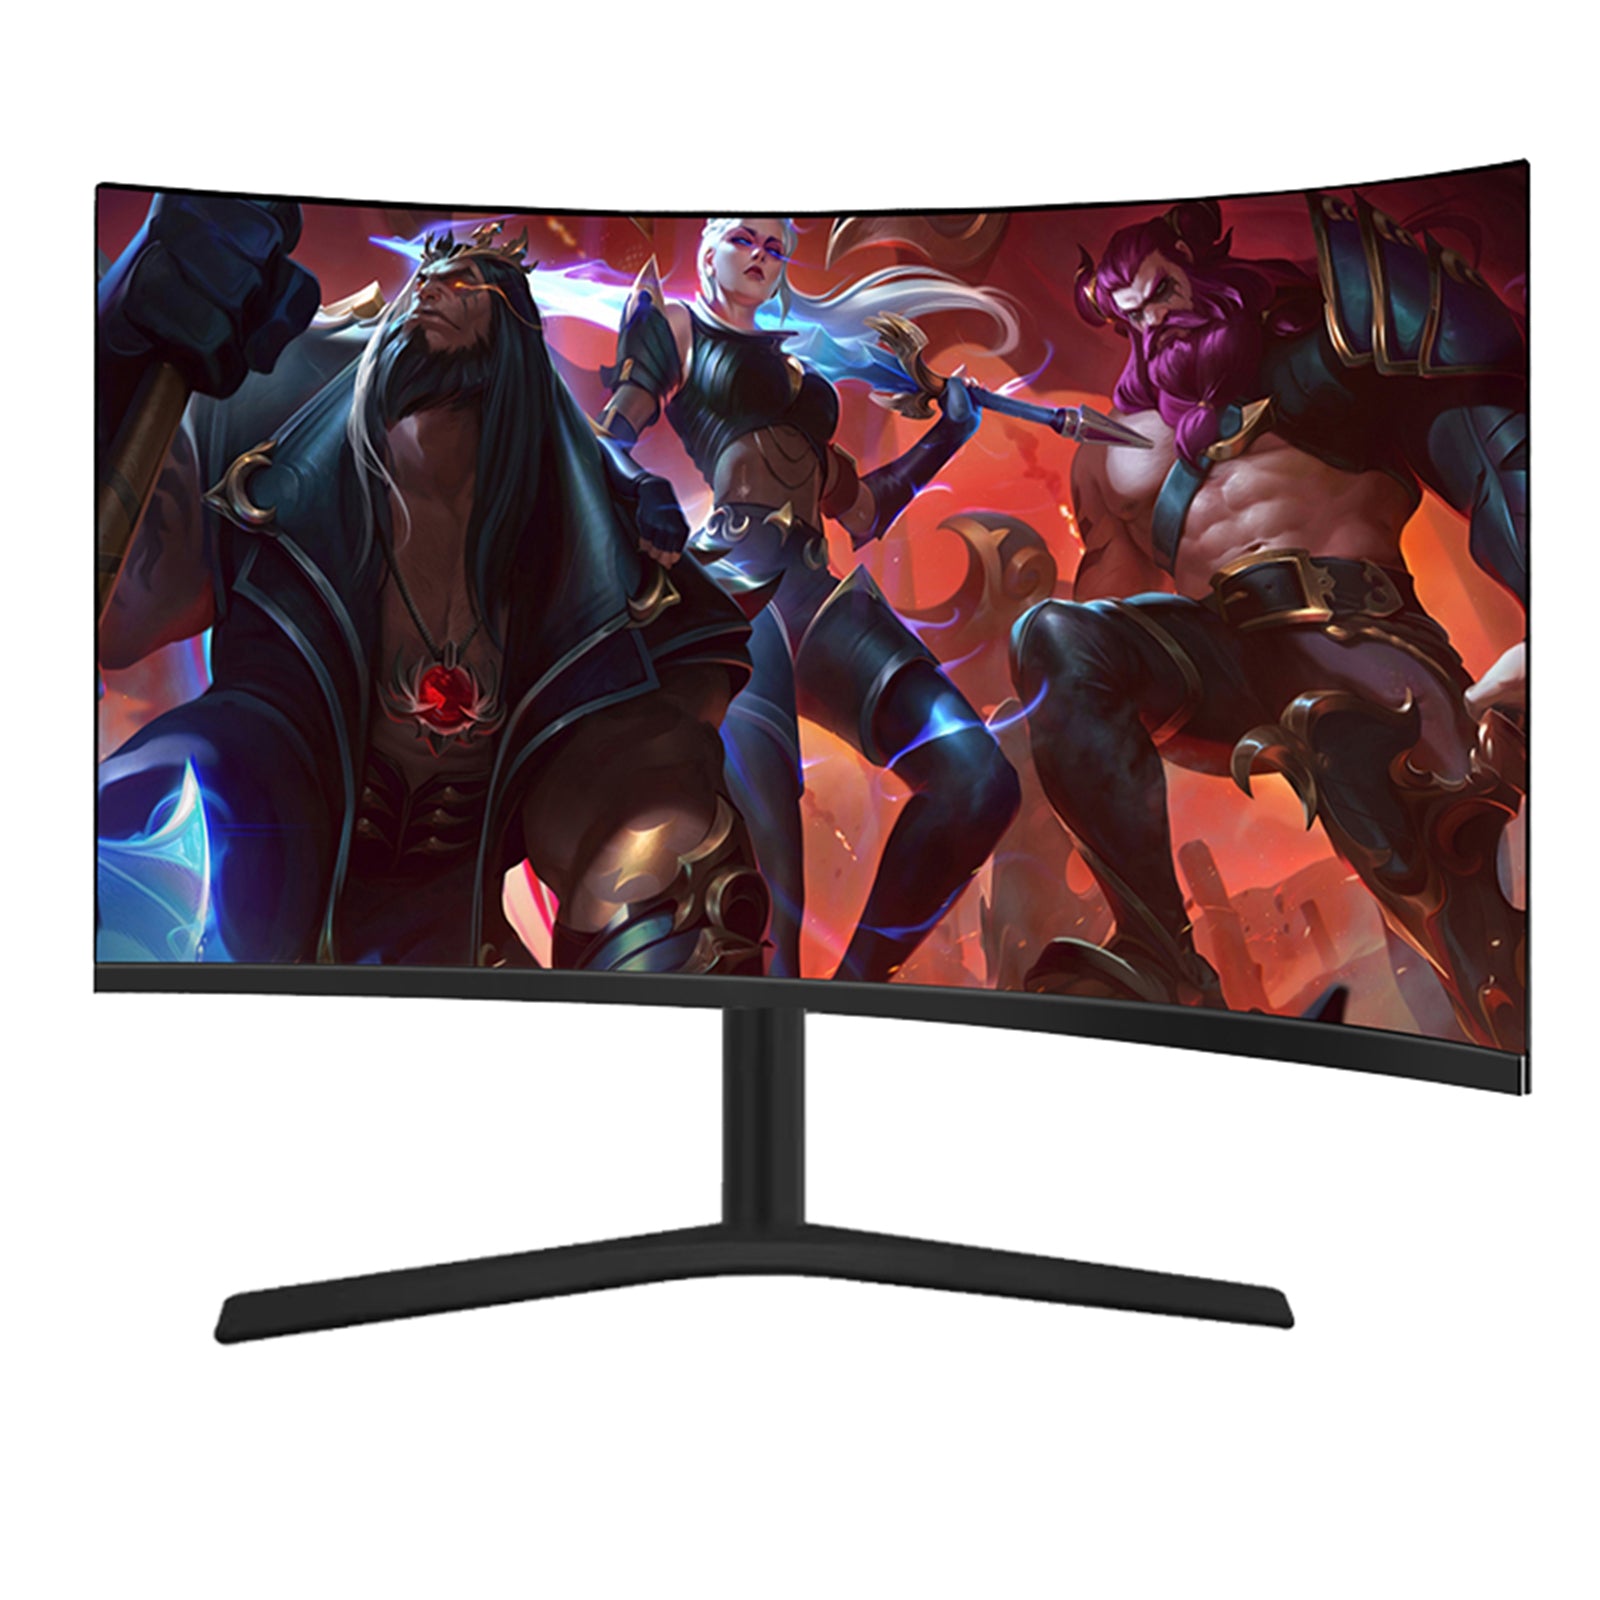 27-curved-led-panel-2560x1440p-refresh-rate-165hz-monitor-aspect-ratio-16-9